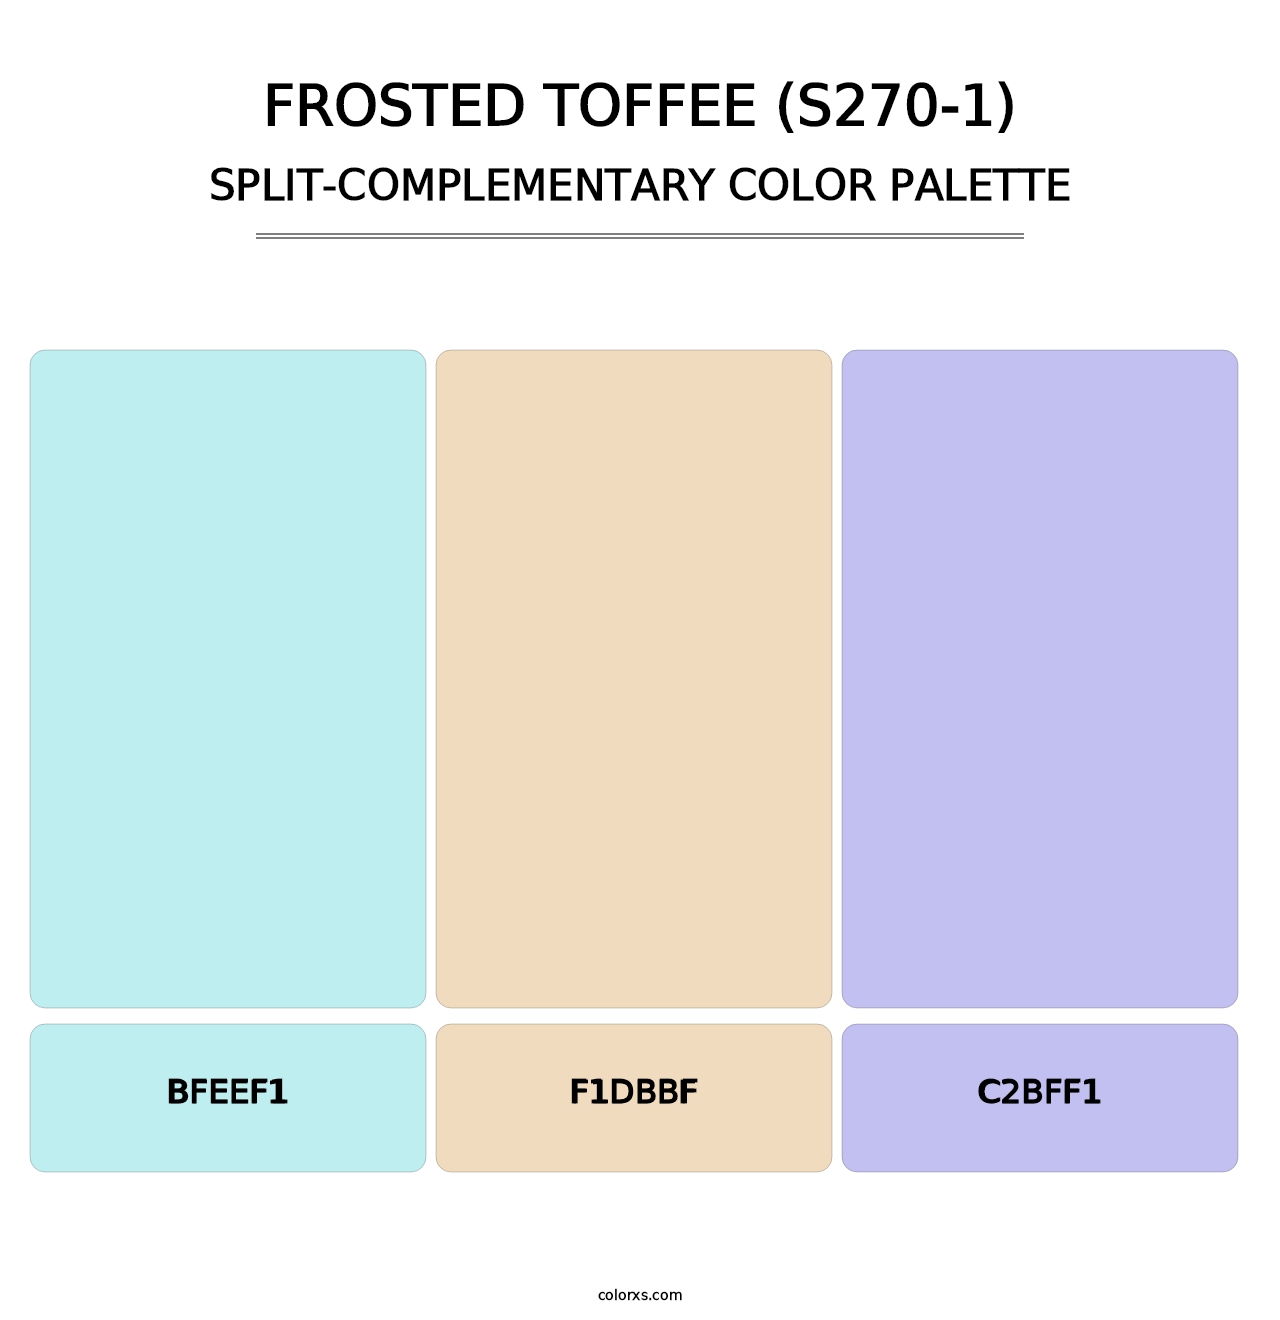 Frosted Toffee (S270-1) - Split-Complementary Color Palette